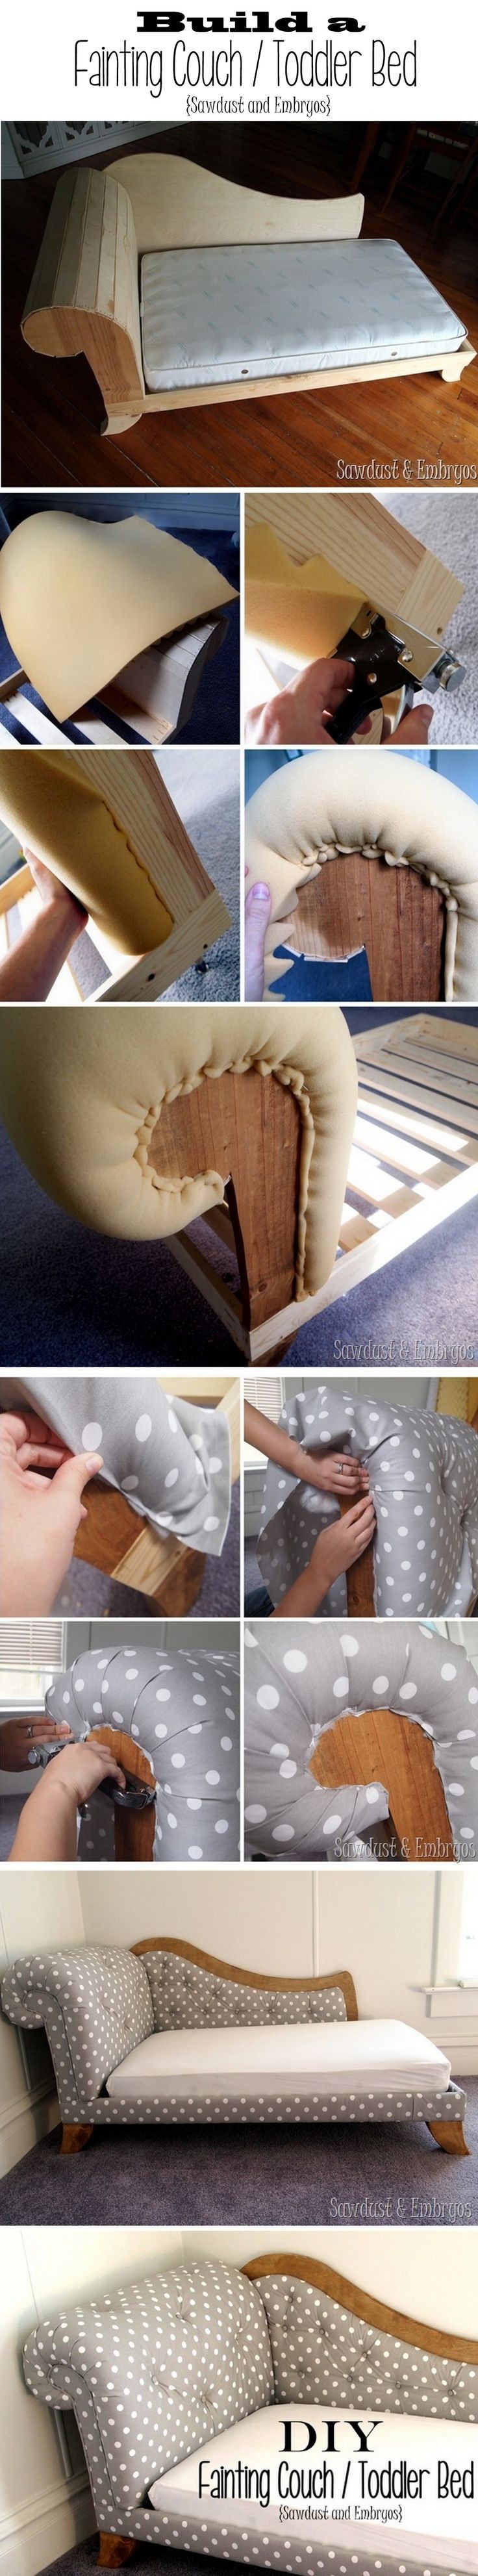 Build and upholster a fainting couch / toddler bed...